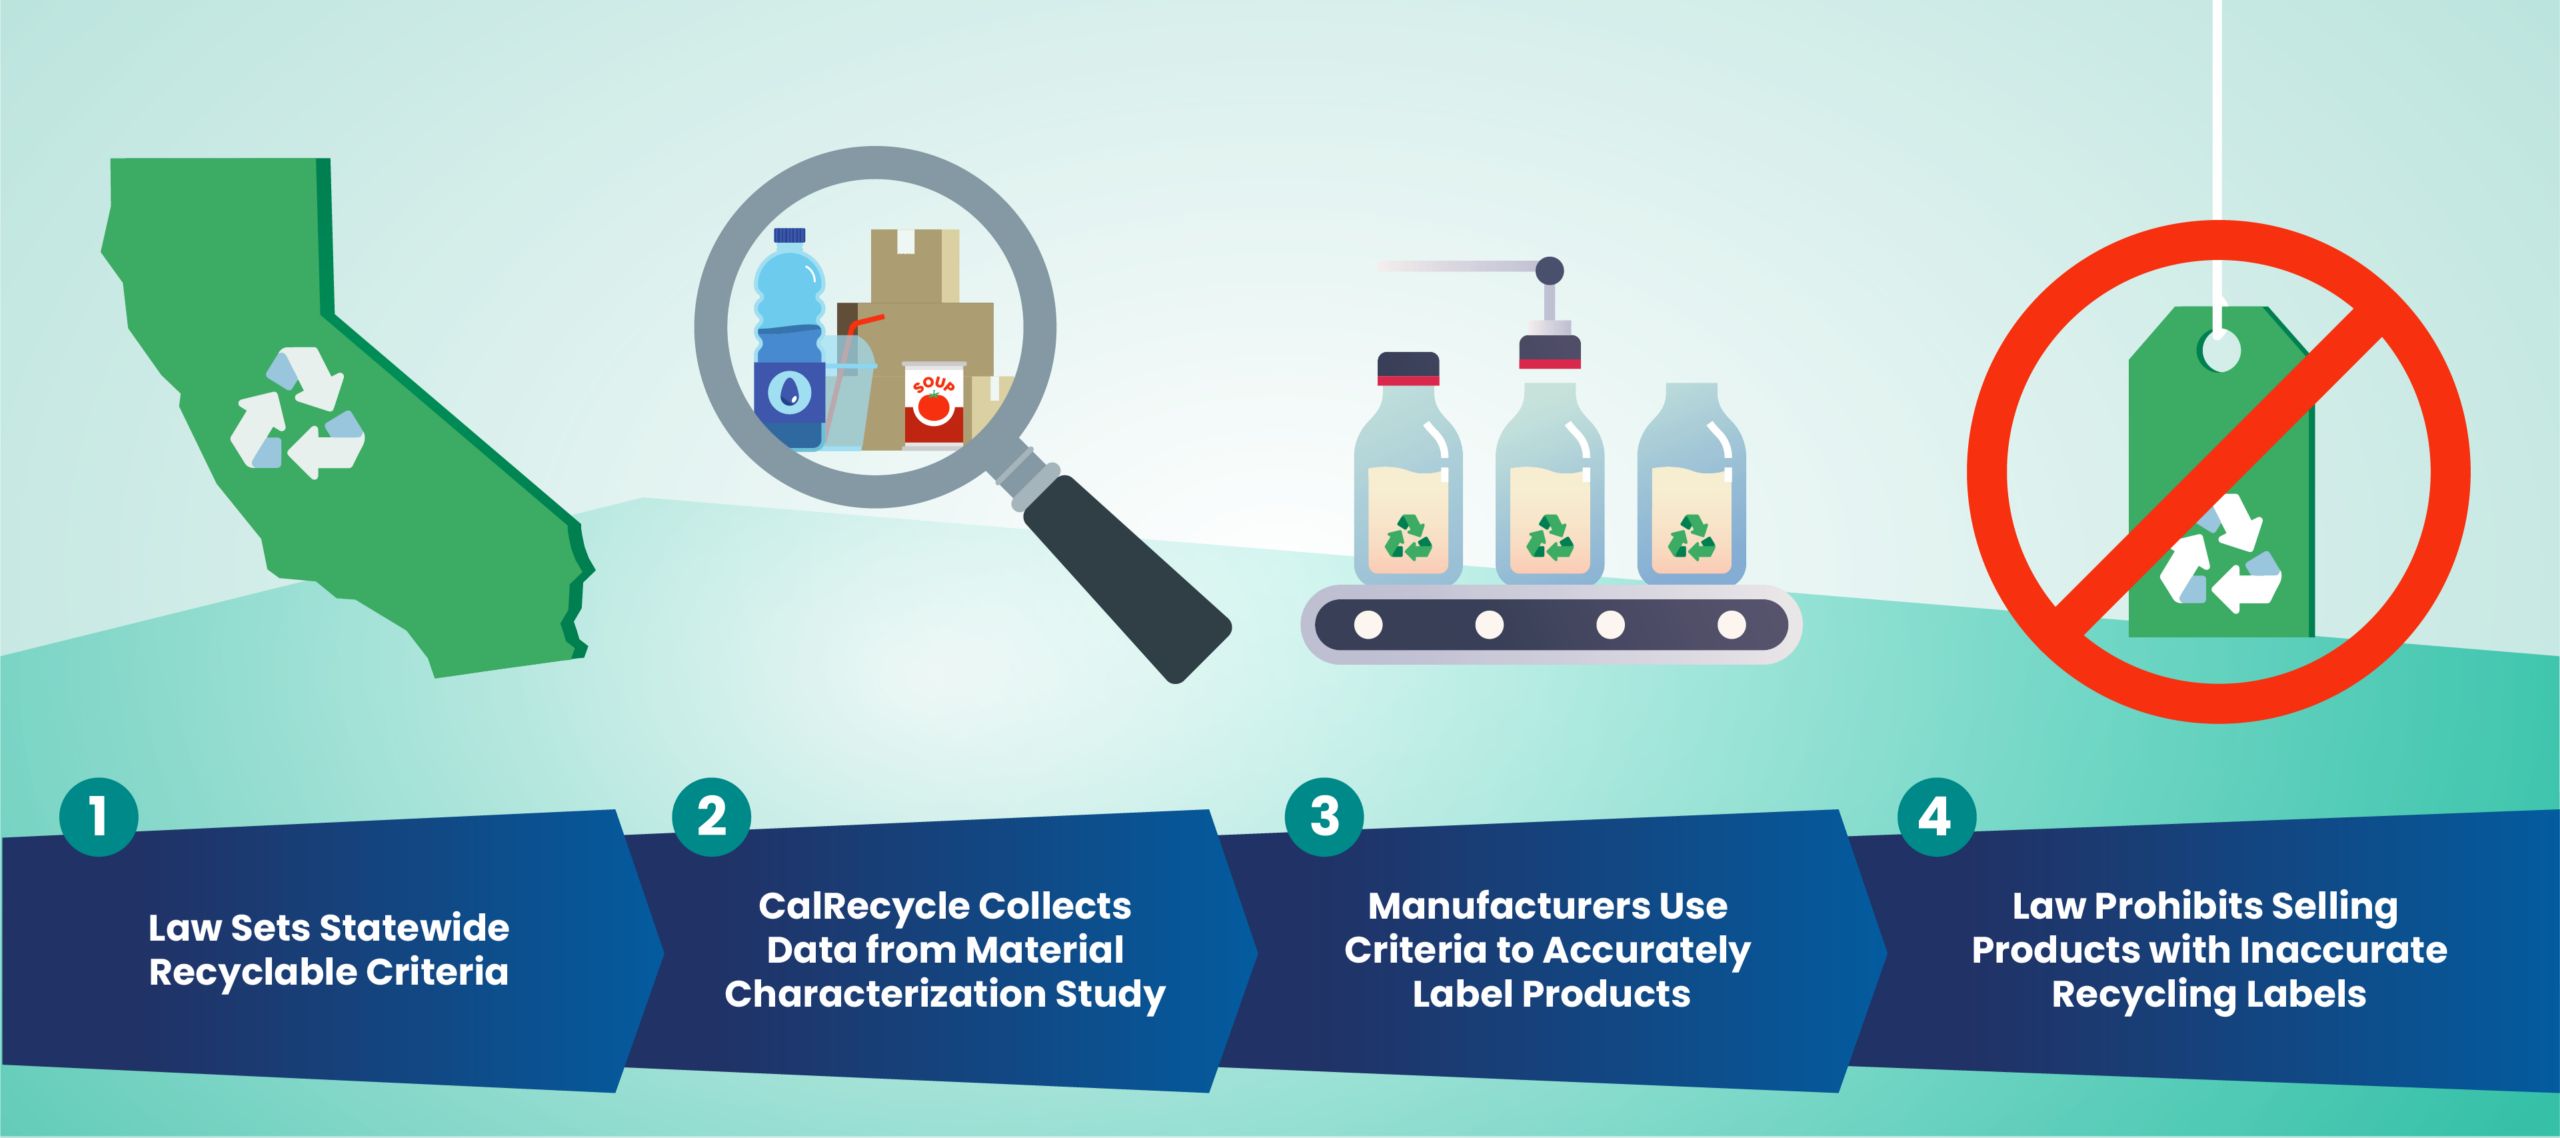 1. Law sets statewide recyclable criteria, 2 CalRecycle collects data from material characterization study, 3 manufacturers use criteria to accurately label products, 4 law prohibits selling products with inaccurate recycling labels